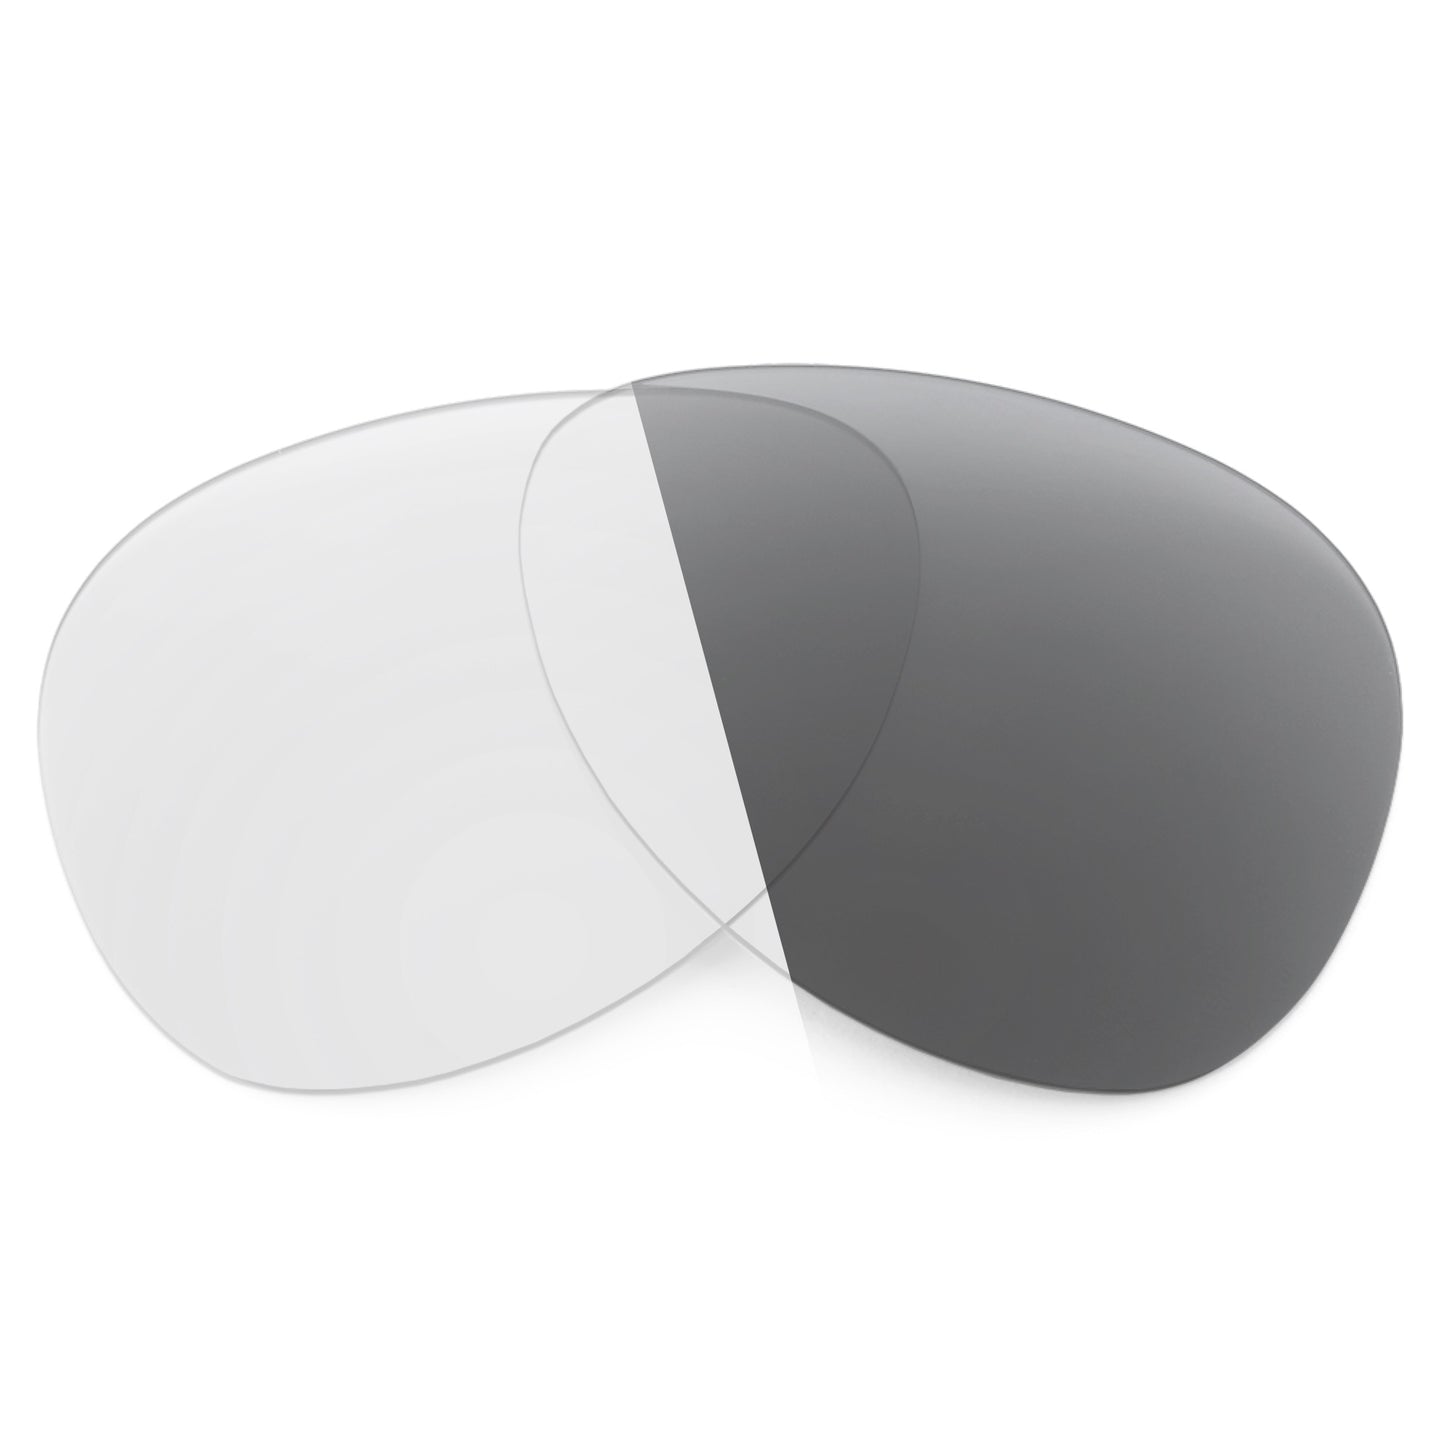 Revant replacement lenses for Ray-Ban RB3562 59mm Non-Polarized Adapt Gray Photochromic